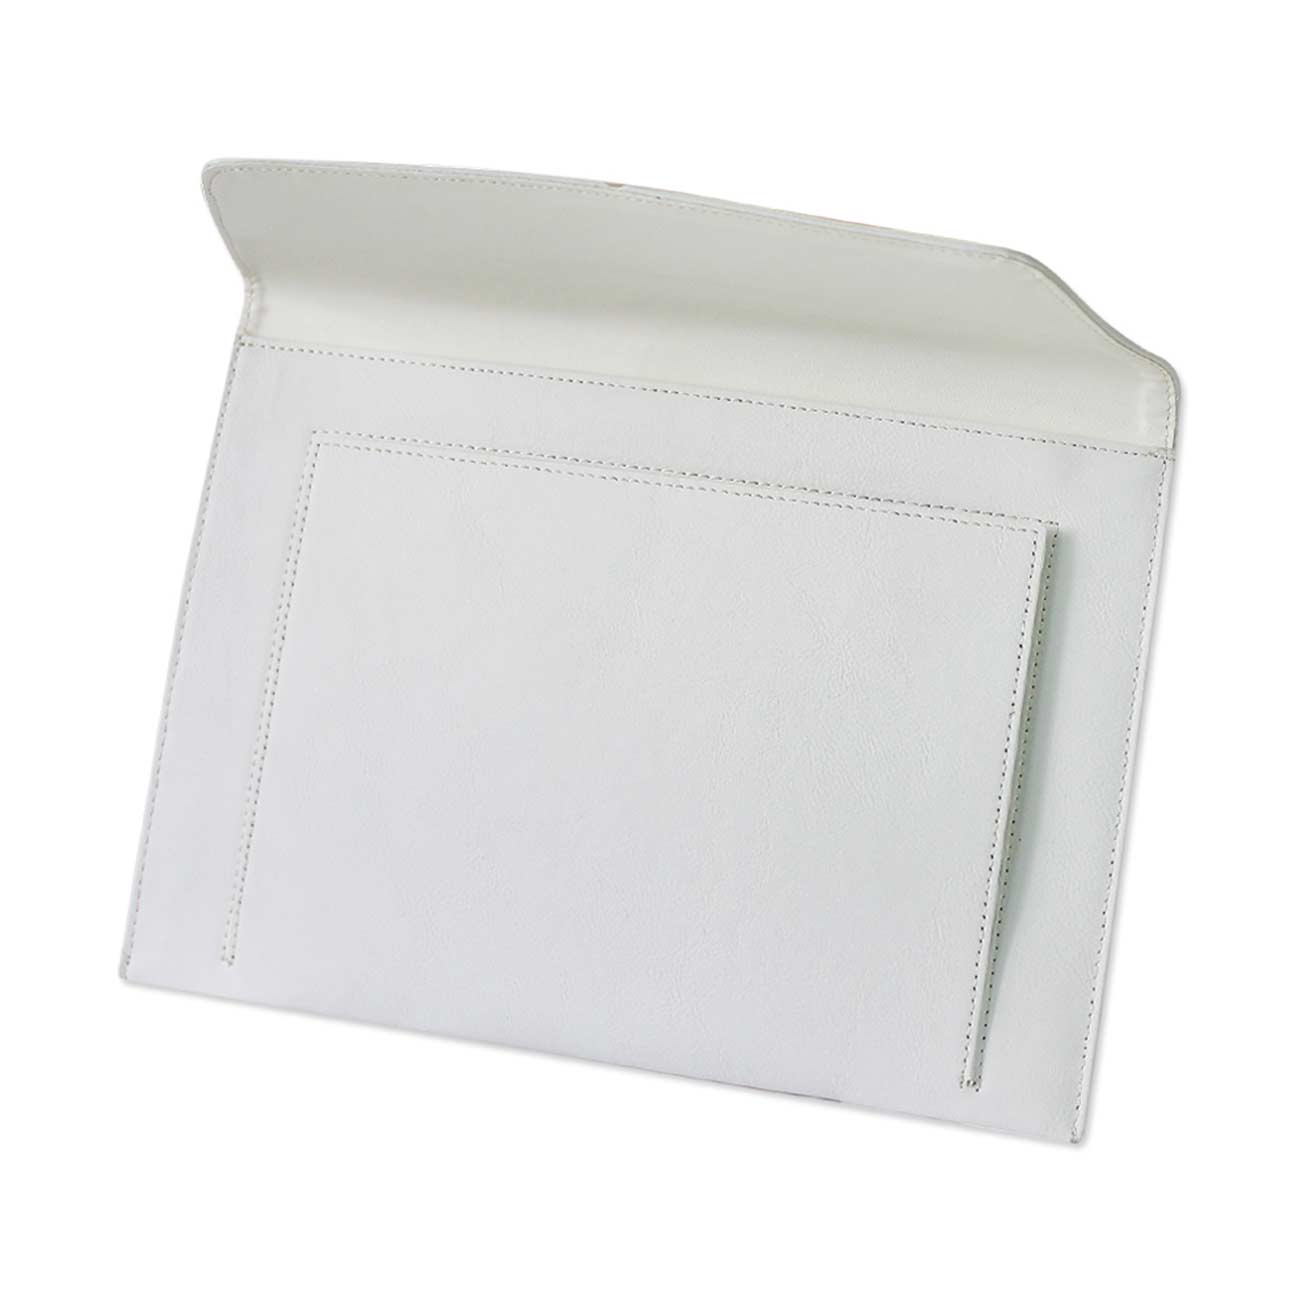 REIKO PREMIUM LEATHER CASE POUCH FOR 10.1INCHES IPADS AND TABLETS In WHITE